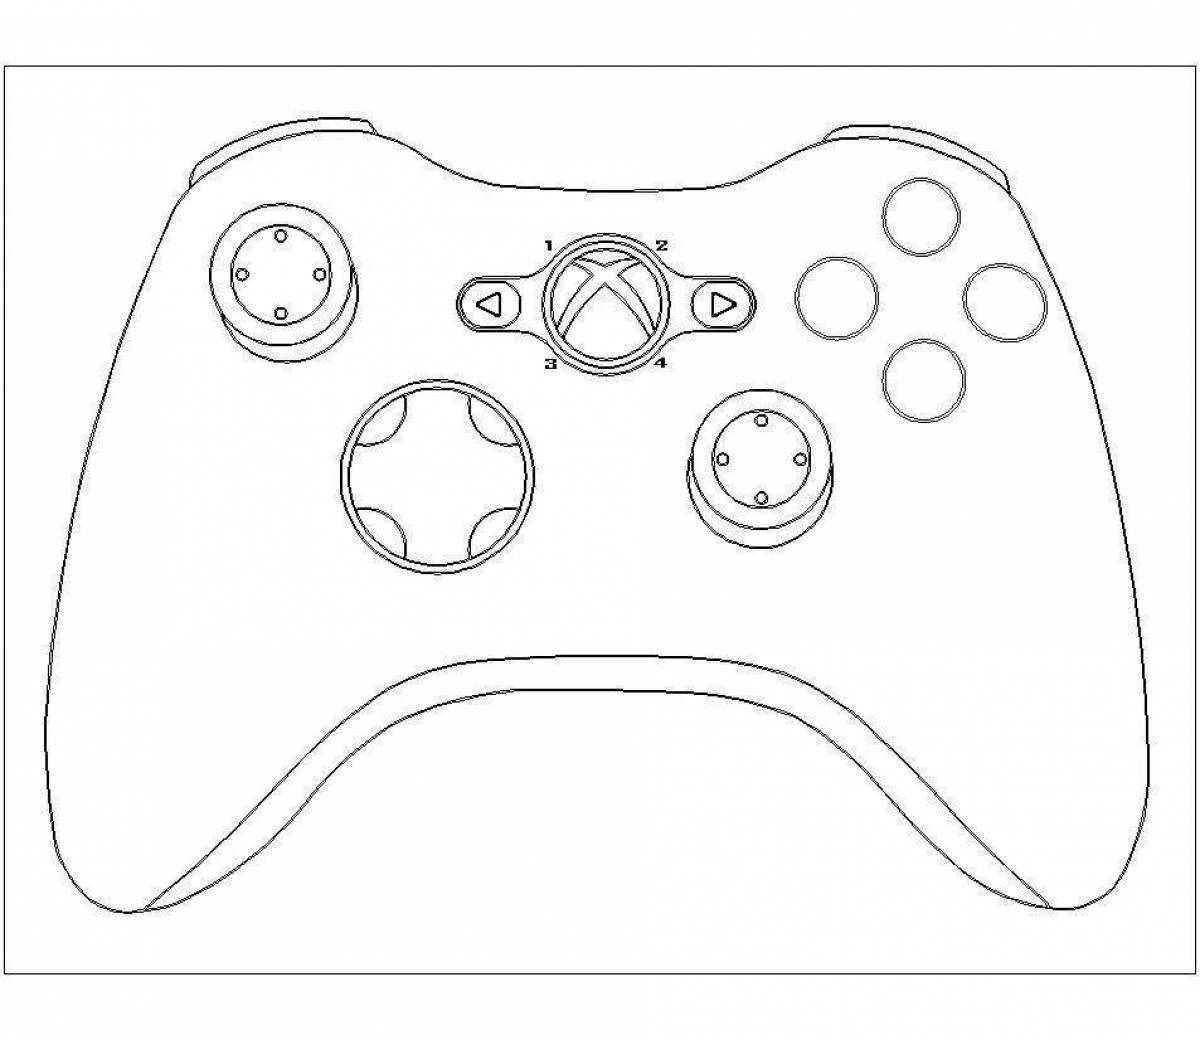 Color-explosive gamepad coloring page